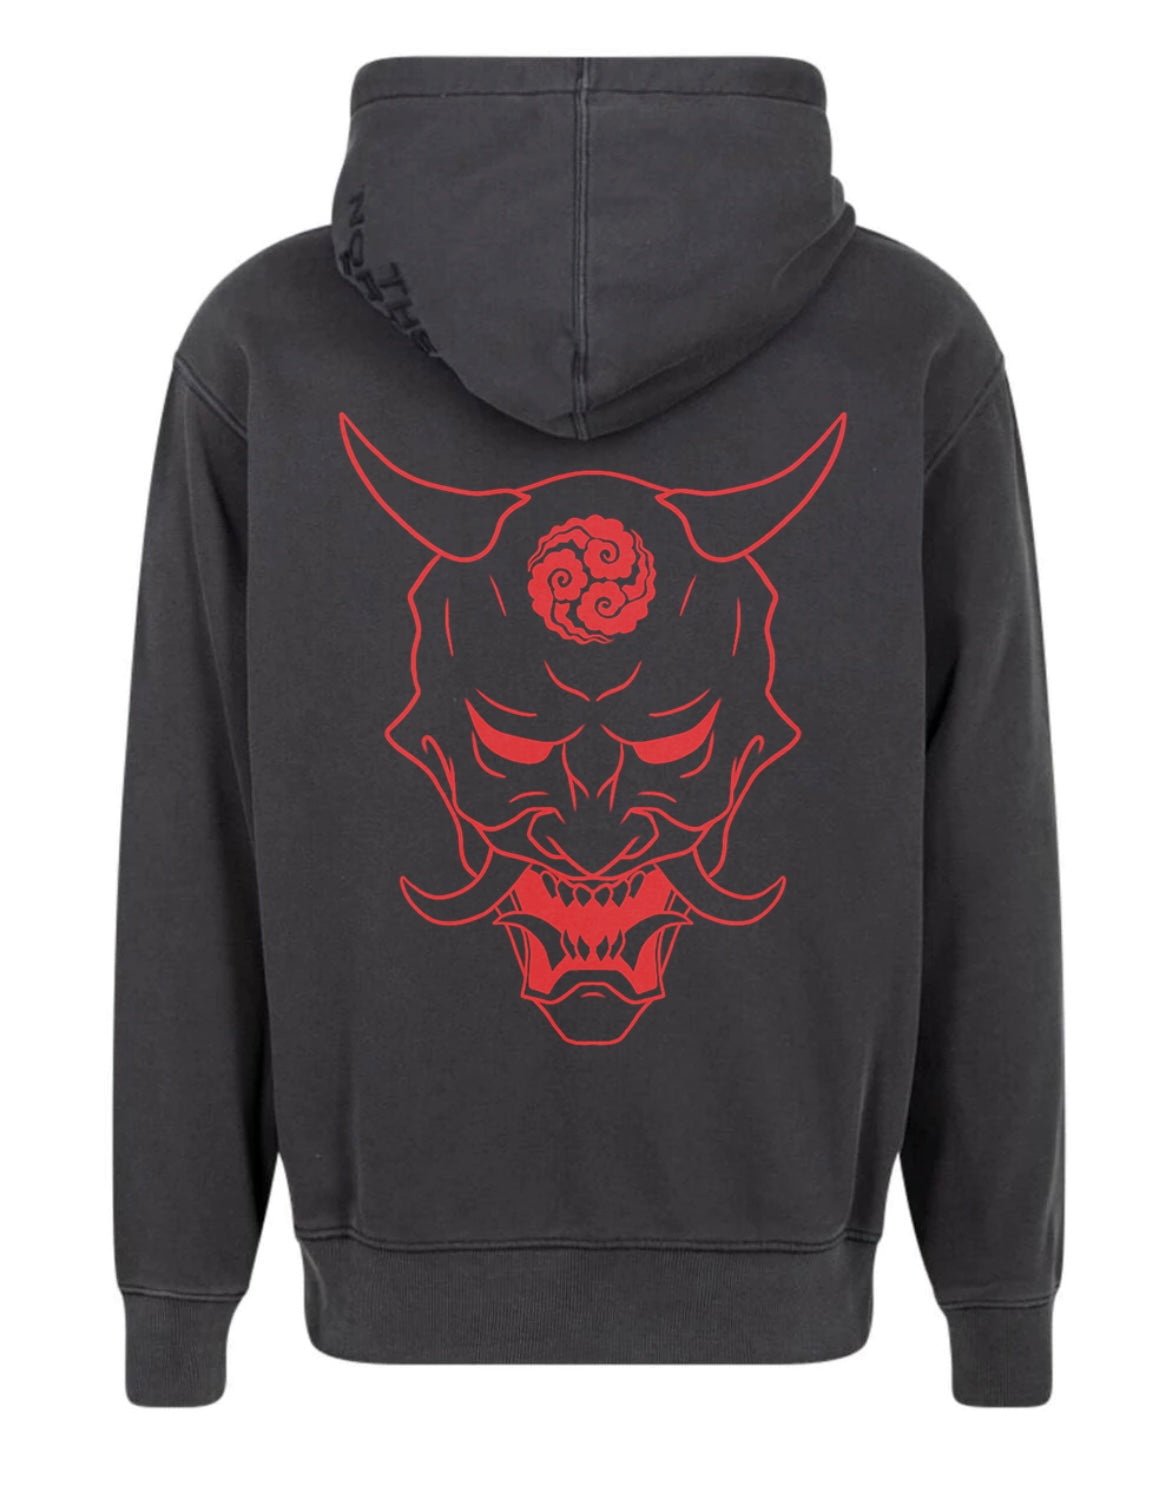 Shinigami X Blood Red Hoodie